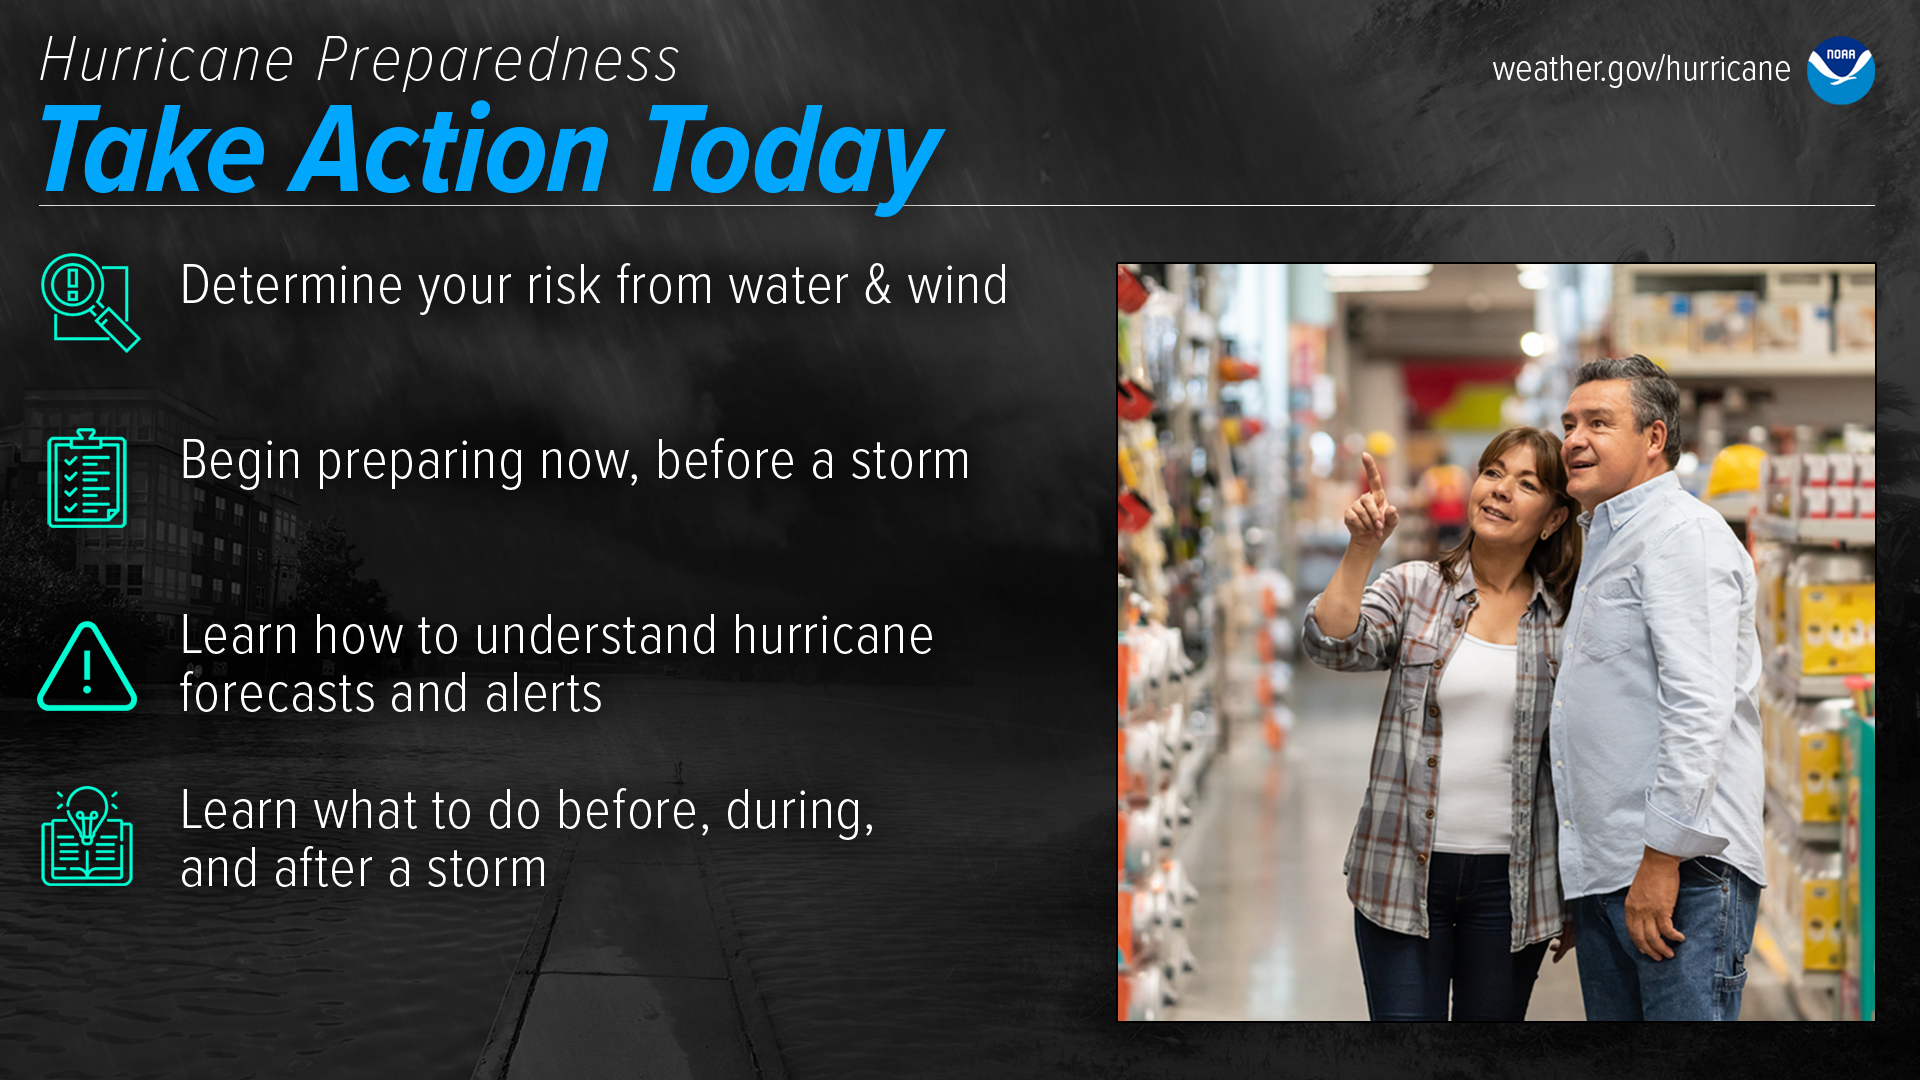 Hurricane Preparedness - Take Action Today. Determine your risk from water and wind. Begin preparing now, before a storm. Learn how to understand hurricane forecasts and alerts. Learn what to do before, during, and after a storm. (Image credit: NOAA's National Weather Service)